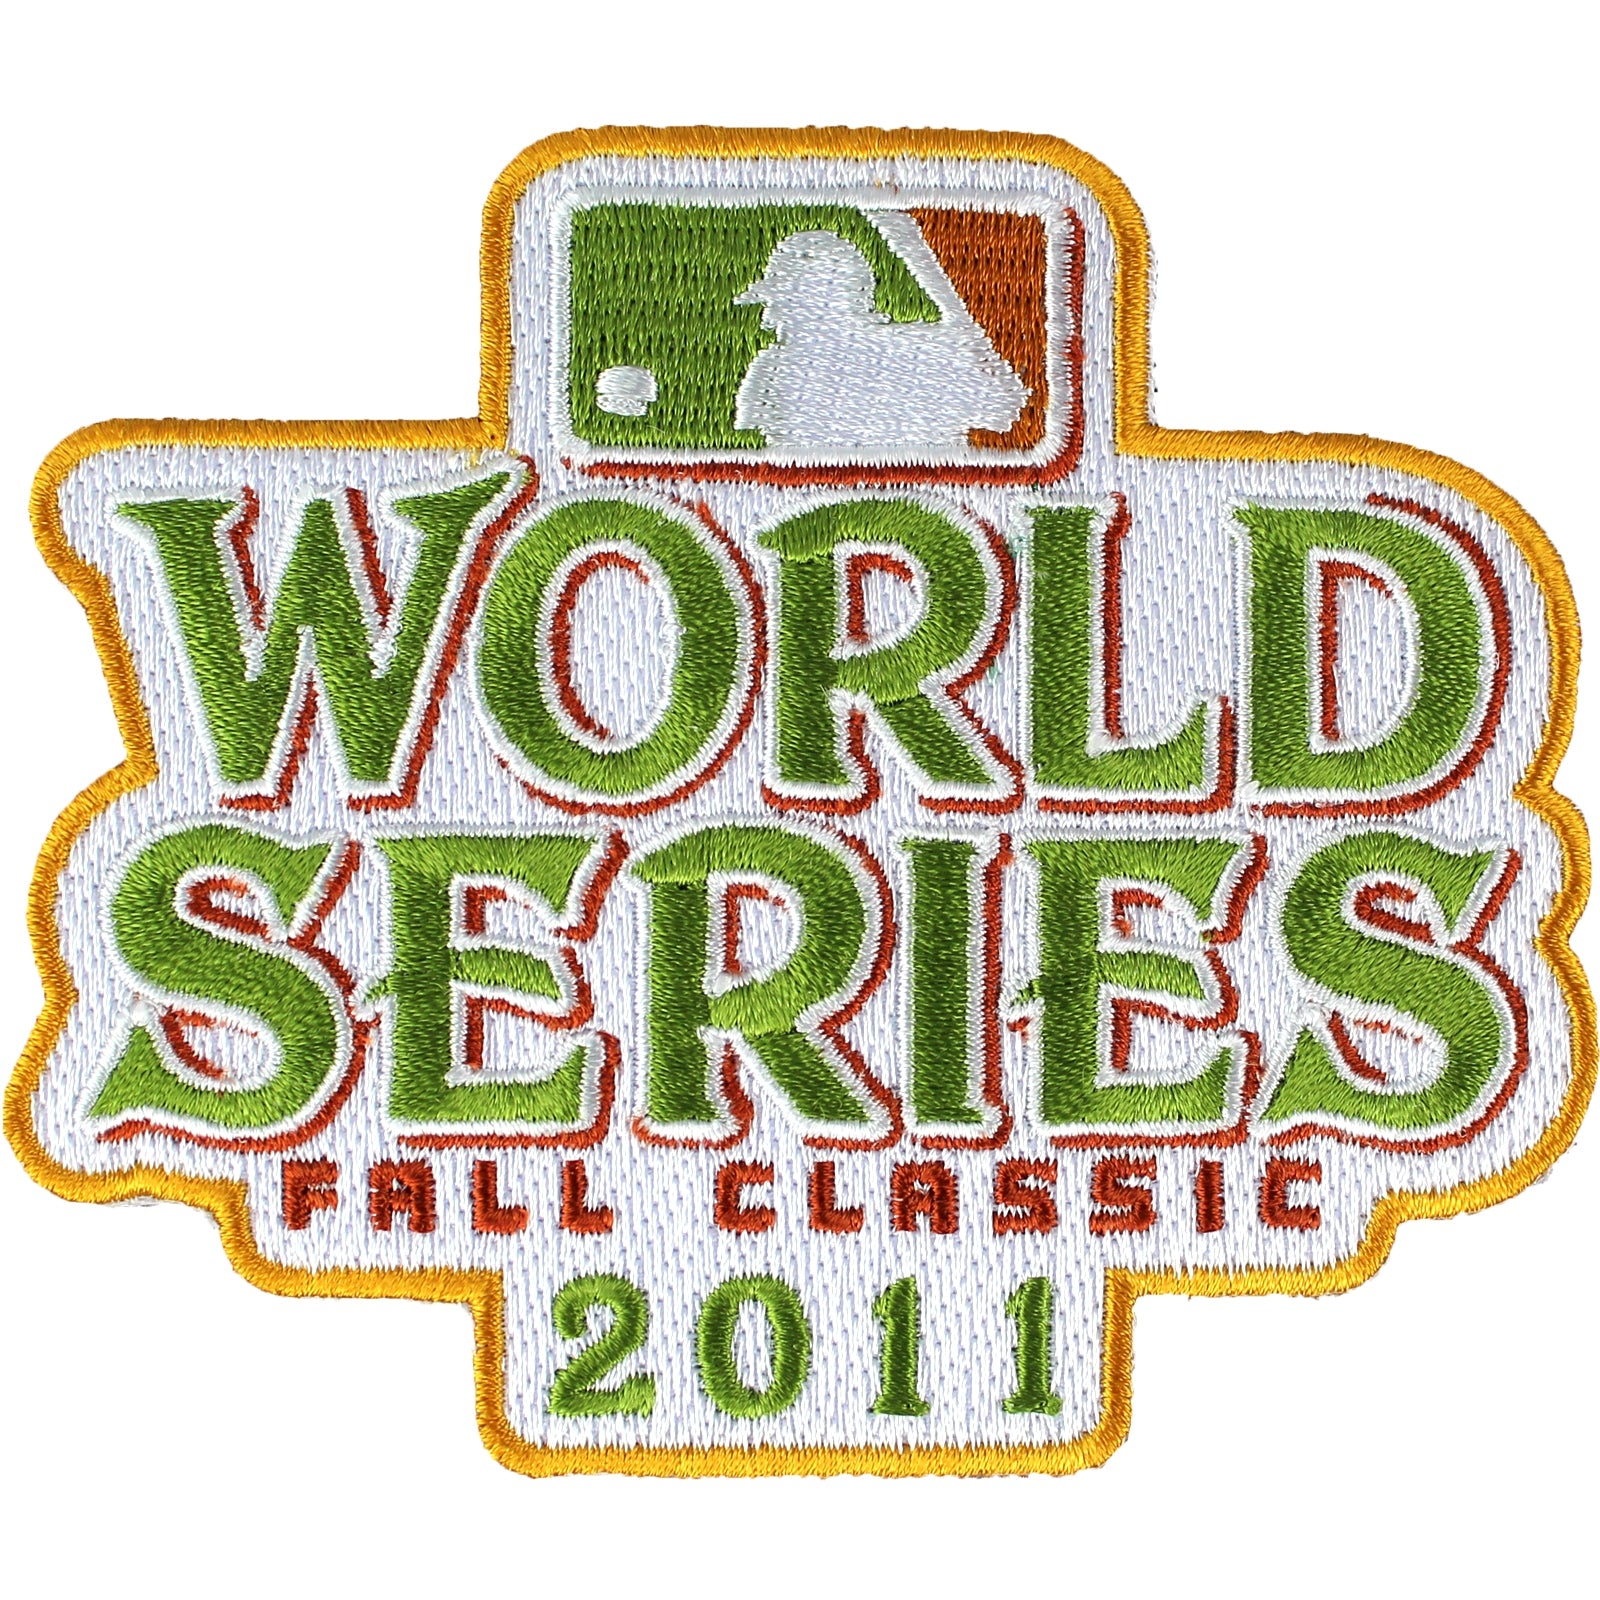 2011 MLB World Series Logo Jersey Sleeve Patch Fall Classic St. Louis  Cardinals vs. Texas Rangers – Patch Collection